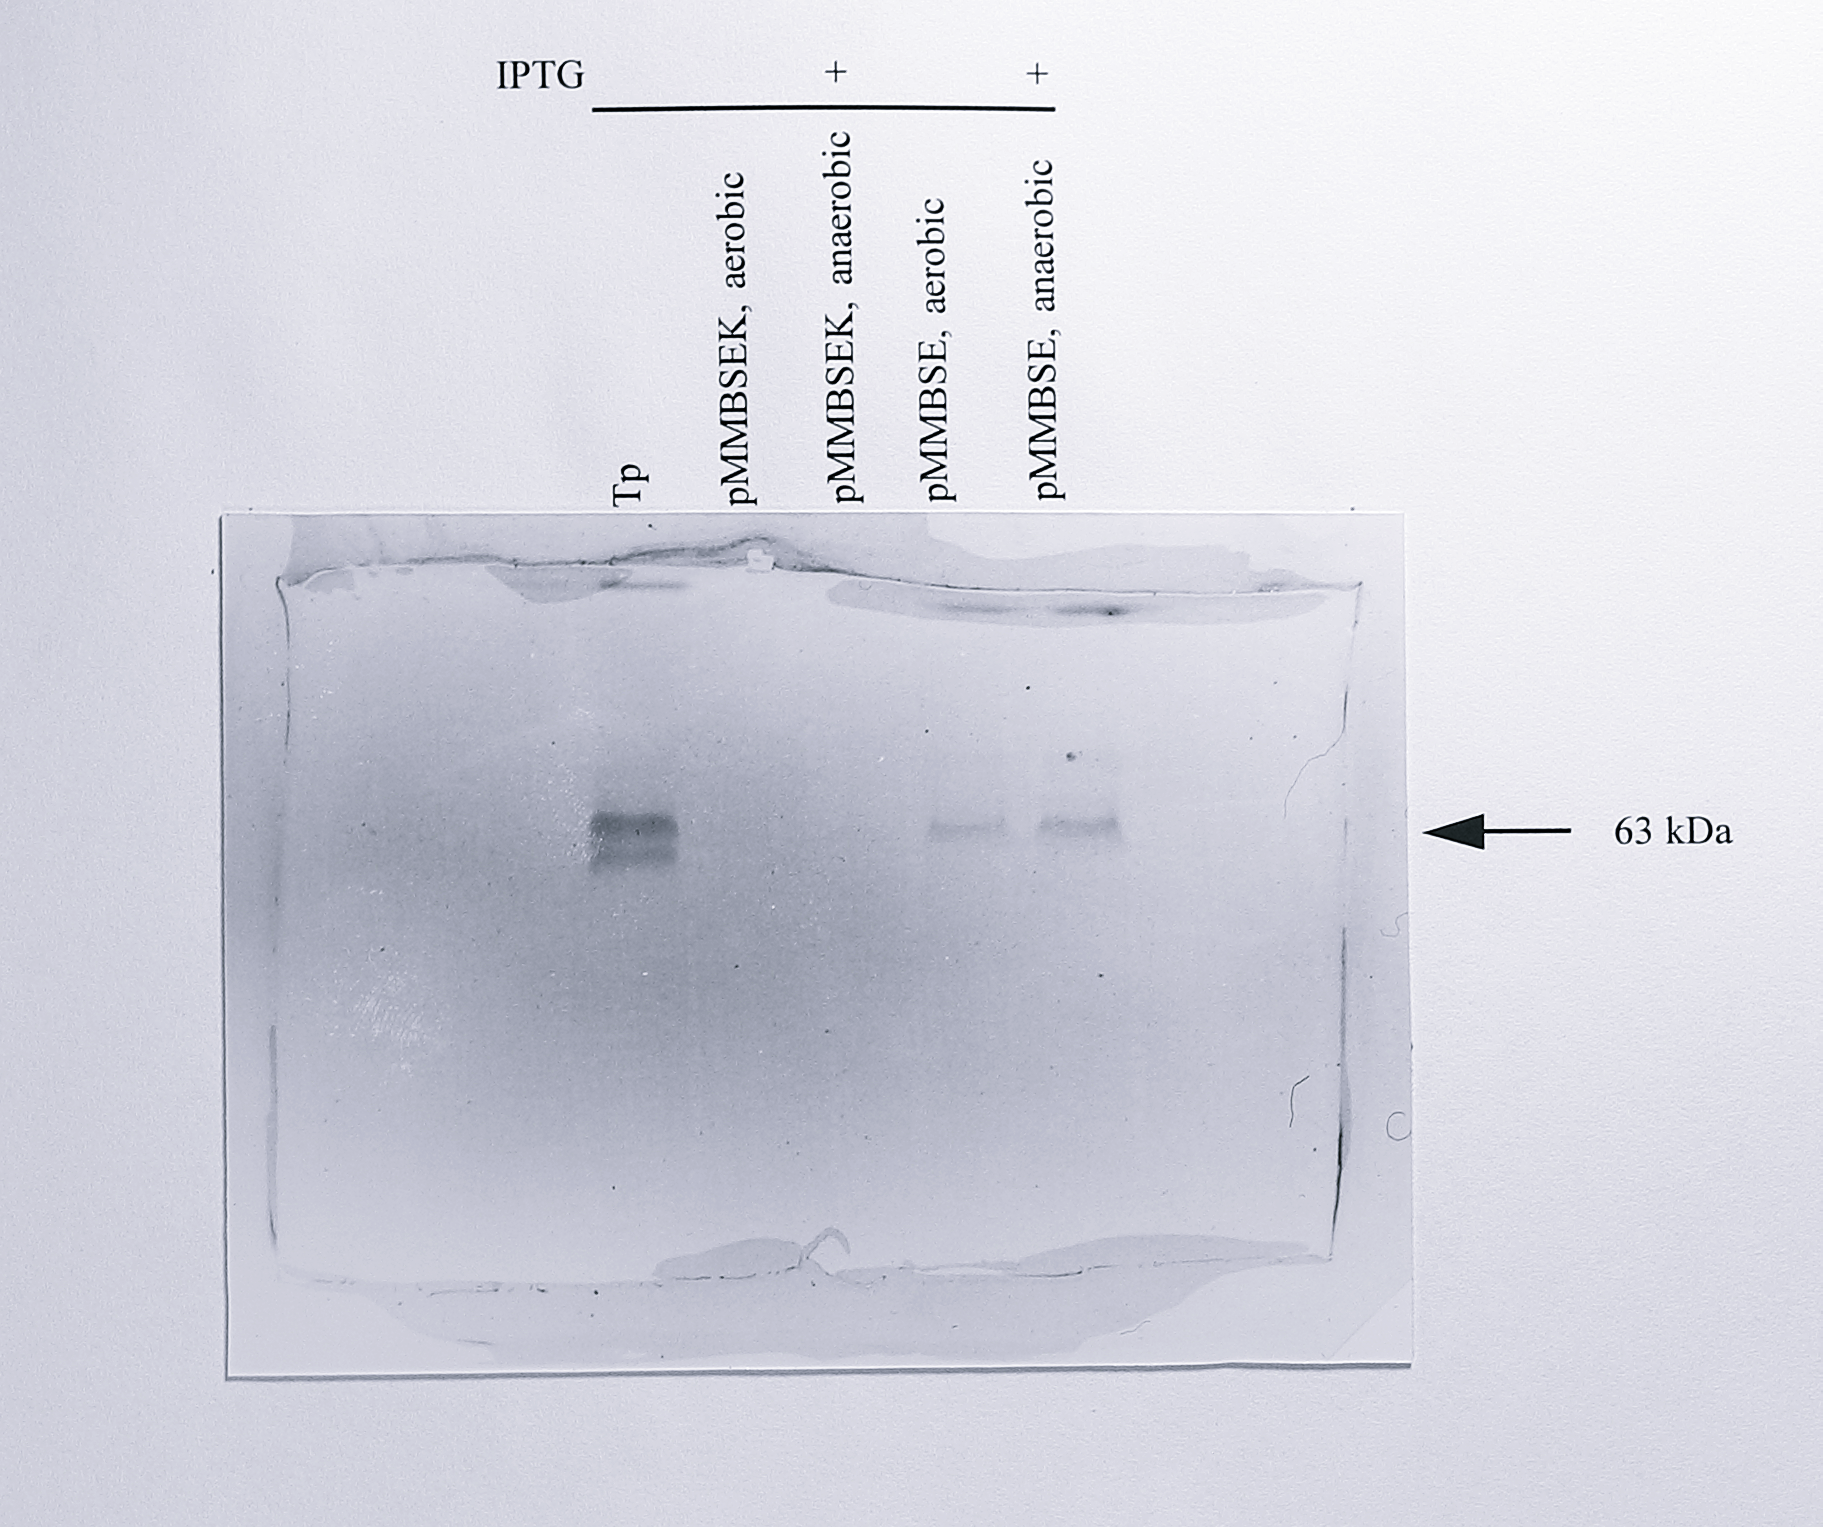 Comparison of the _c_-type cytochrome content of _E. coli_ [pMMBSE] grown under aerobic or anaerobic conditions. 100 $\mu$g of protein from the soluble extracts indicated was separated by electrophoresis on an 8% SDS-PAGE gel and stained for the presence of covalently-attached haem using tetramethylbenzidine and H$_2$O$_2$, as described in Materials and Methods. The lane labelled Tp contained 5 $\mu$g of purified cytochrome _cd_$_1$ for comparison.